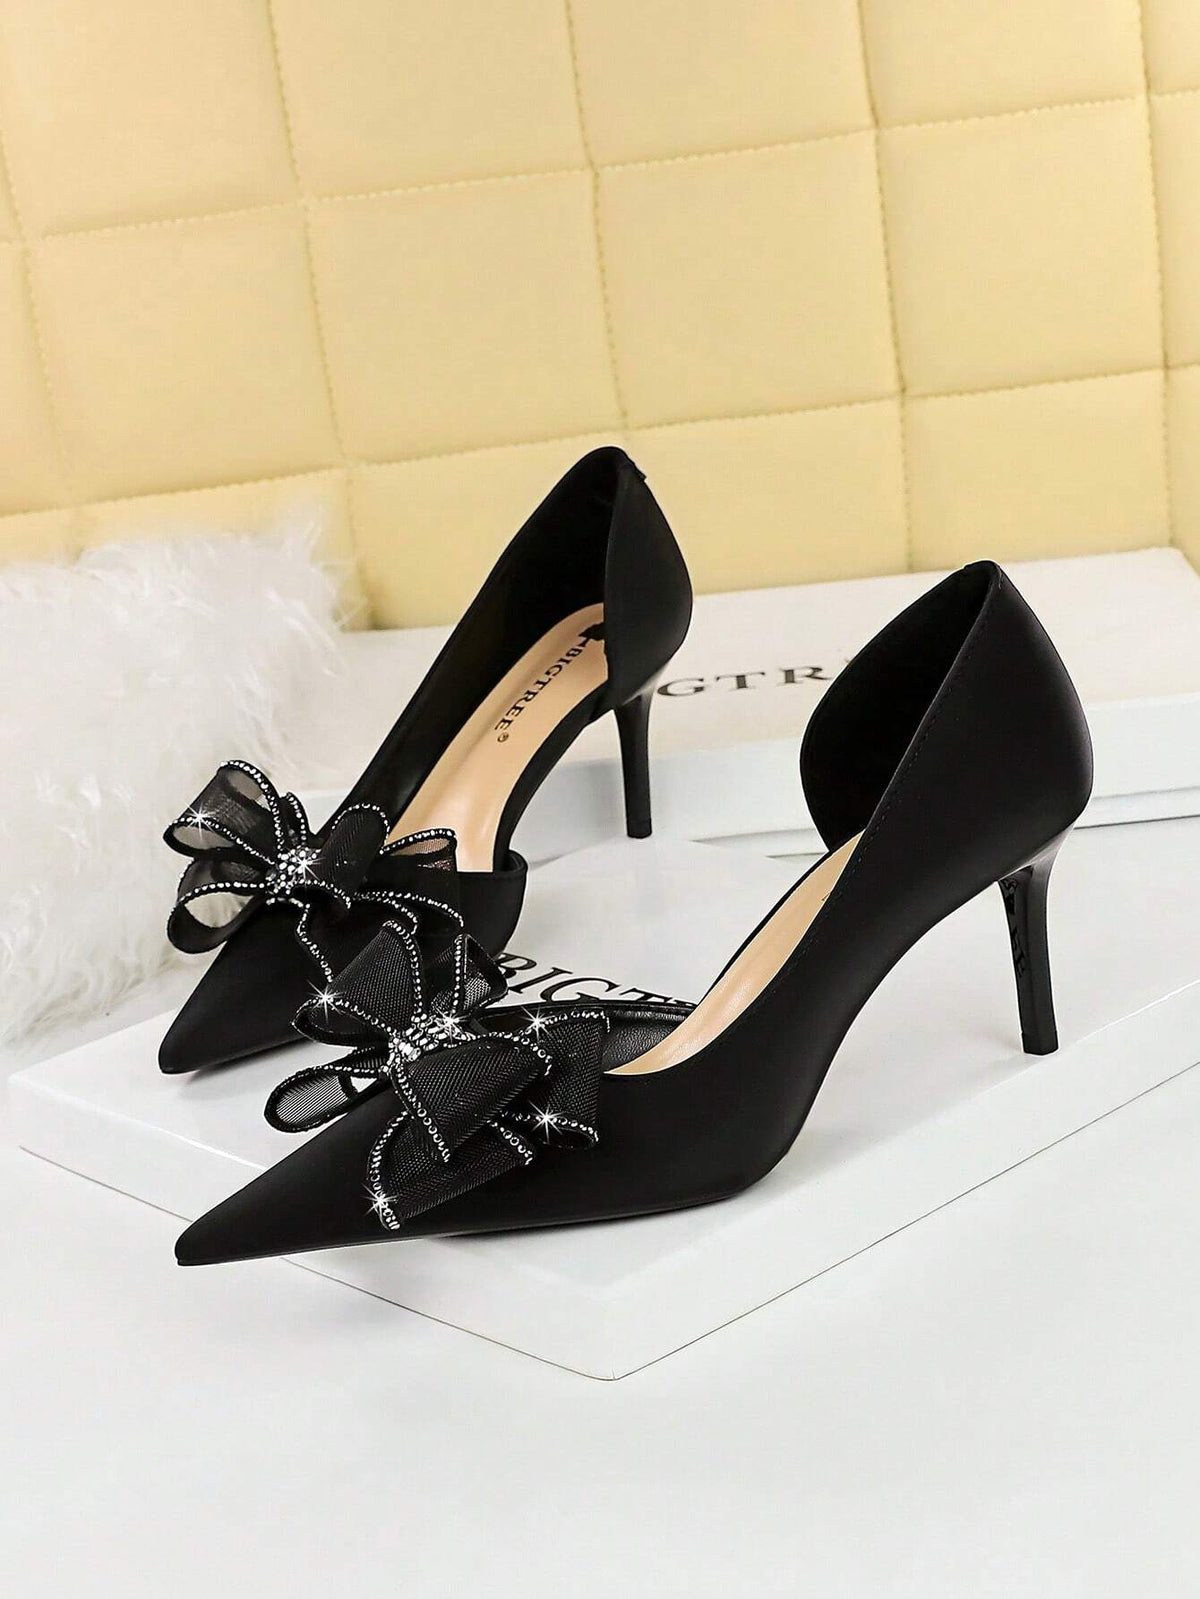 Korean Version Fashionable High Heels Shoes For Party, Pointed Toe, Thin Heel, Shallow Mouth, Diamond, Lace, Bow Knot